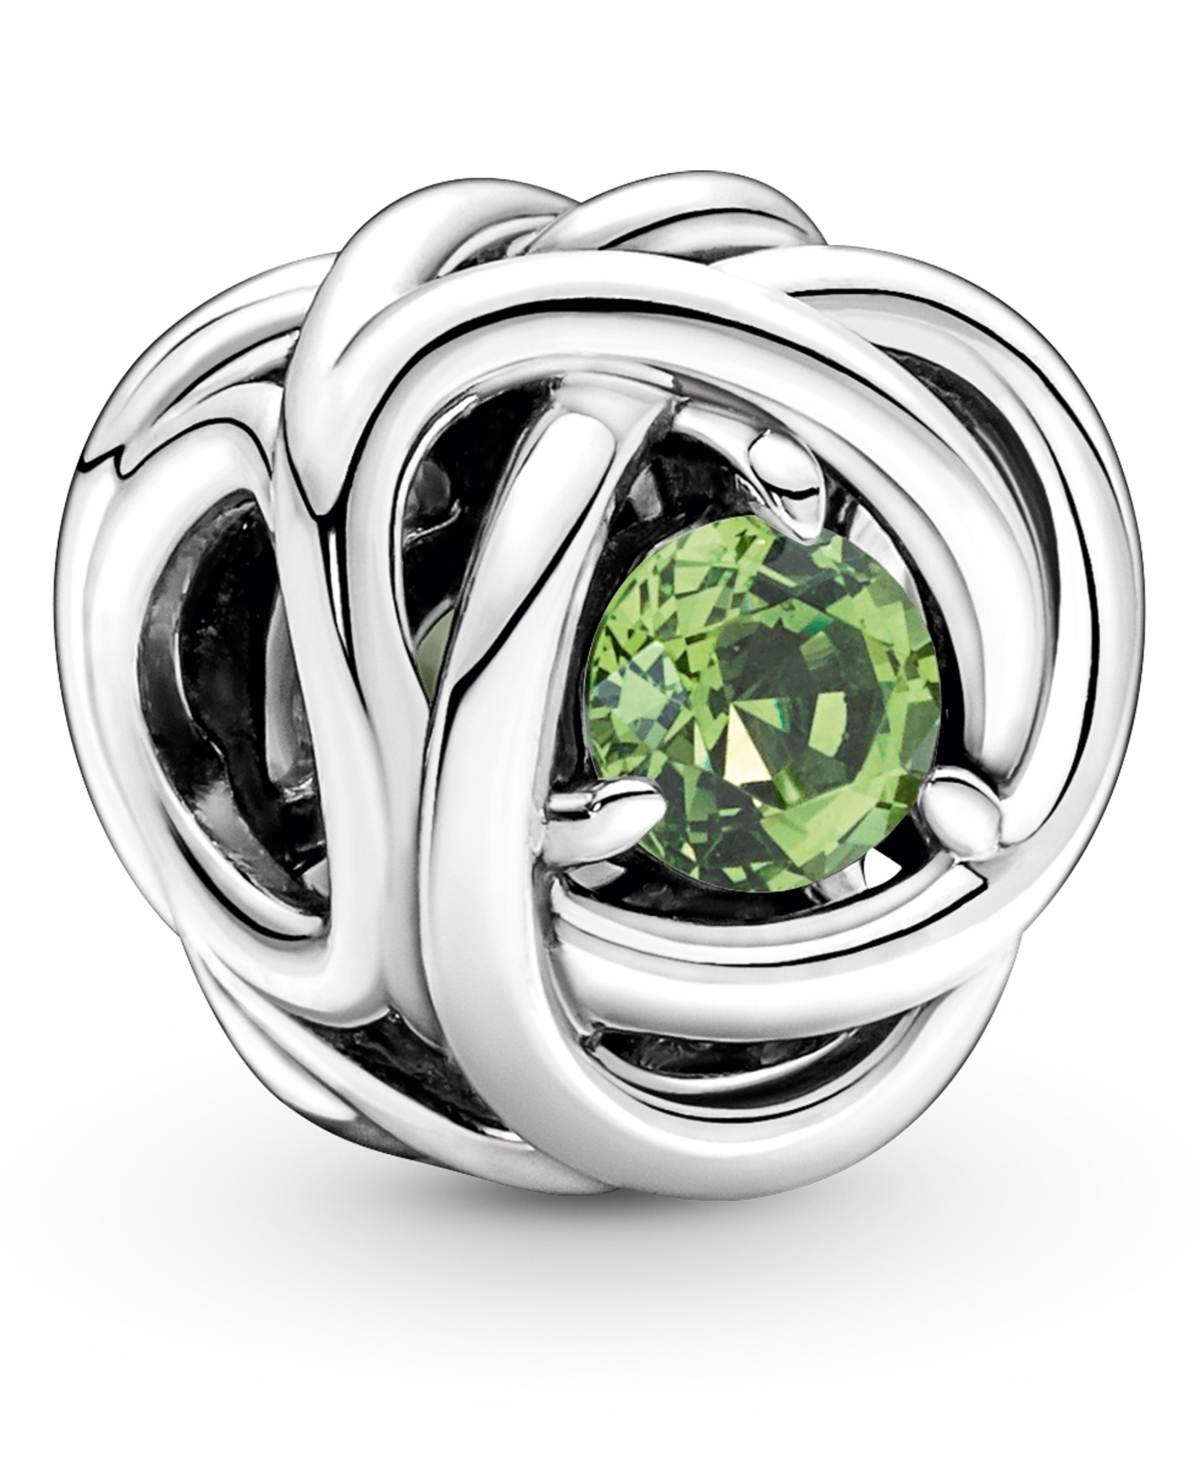 Pandora Birthstone Crystals Eternity Circle Charm In Green,periodot - August